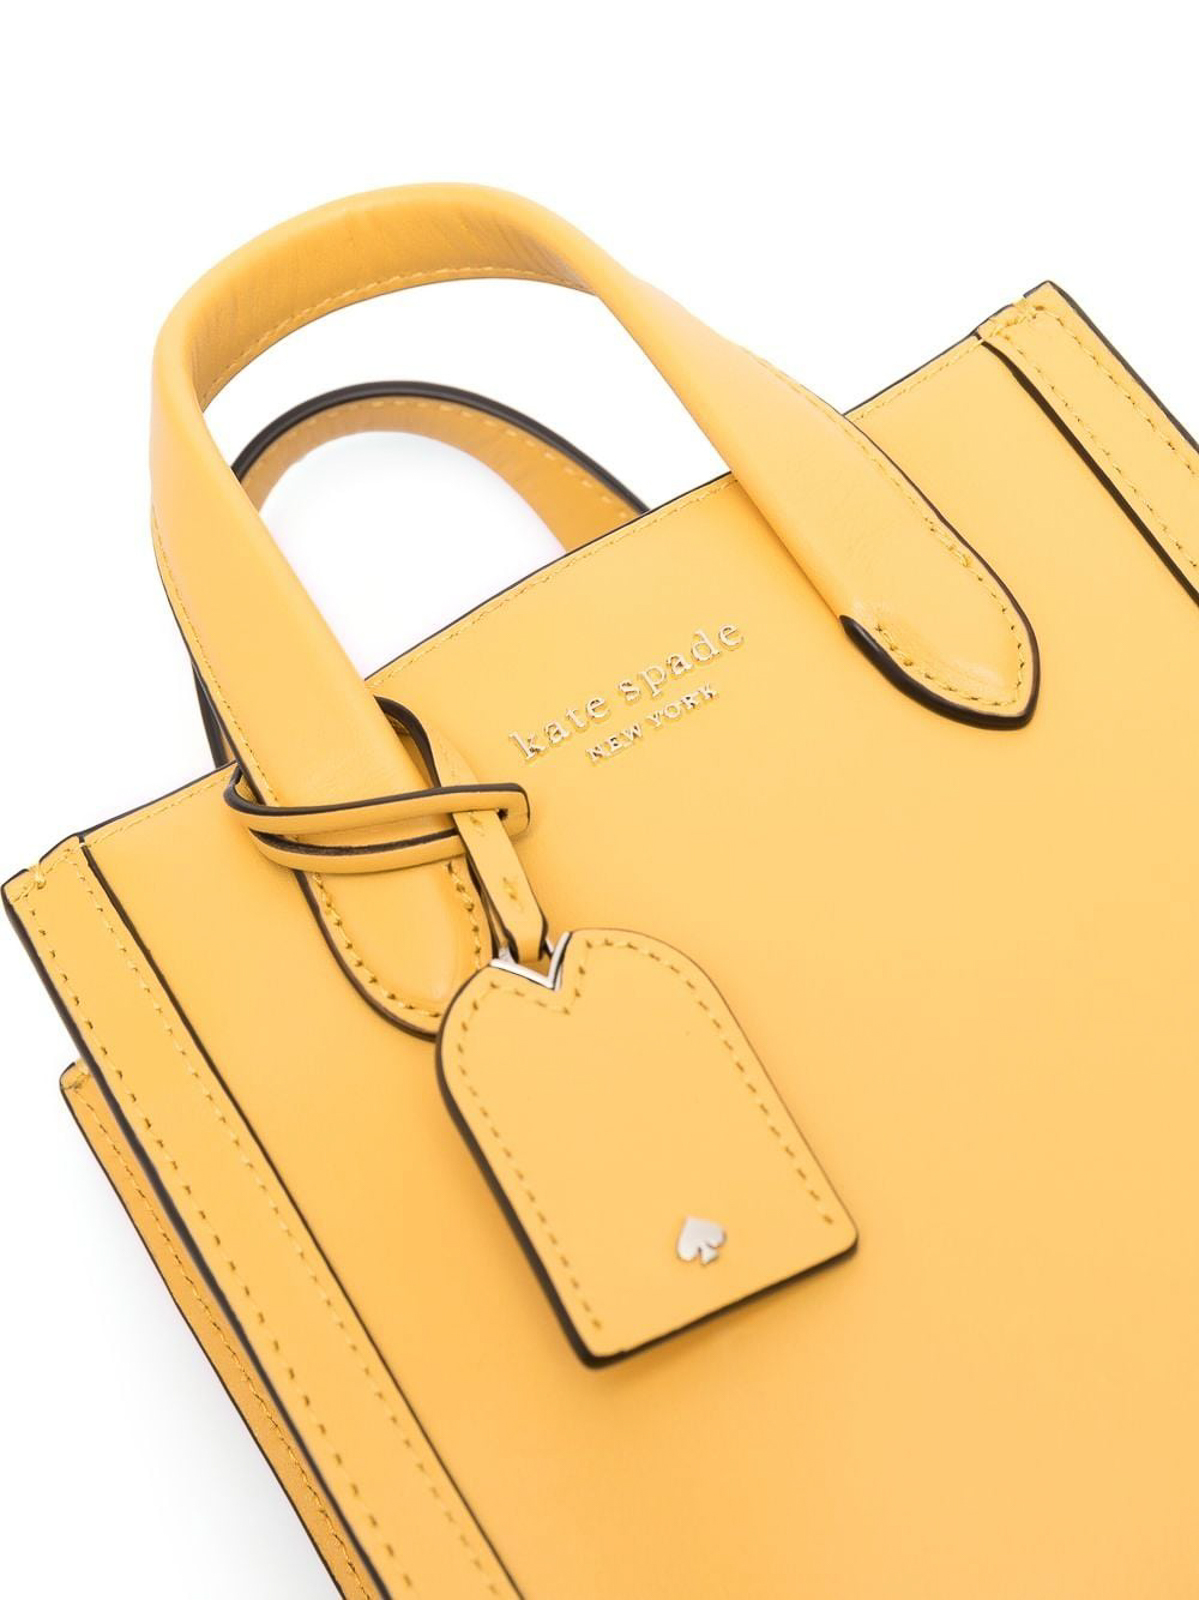 manhattan (tote), where anything is - kate spade new york